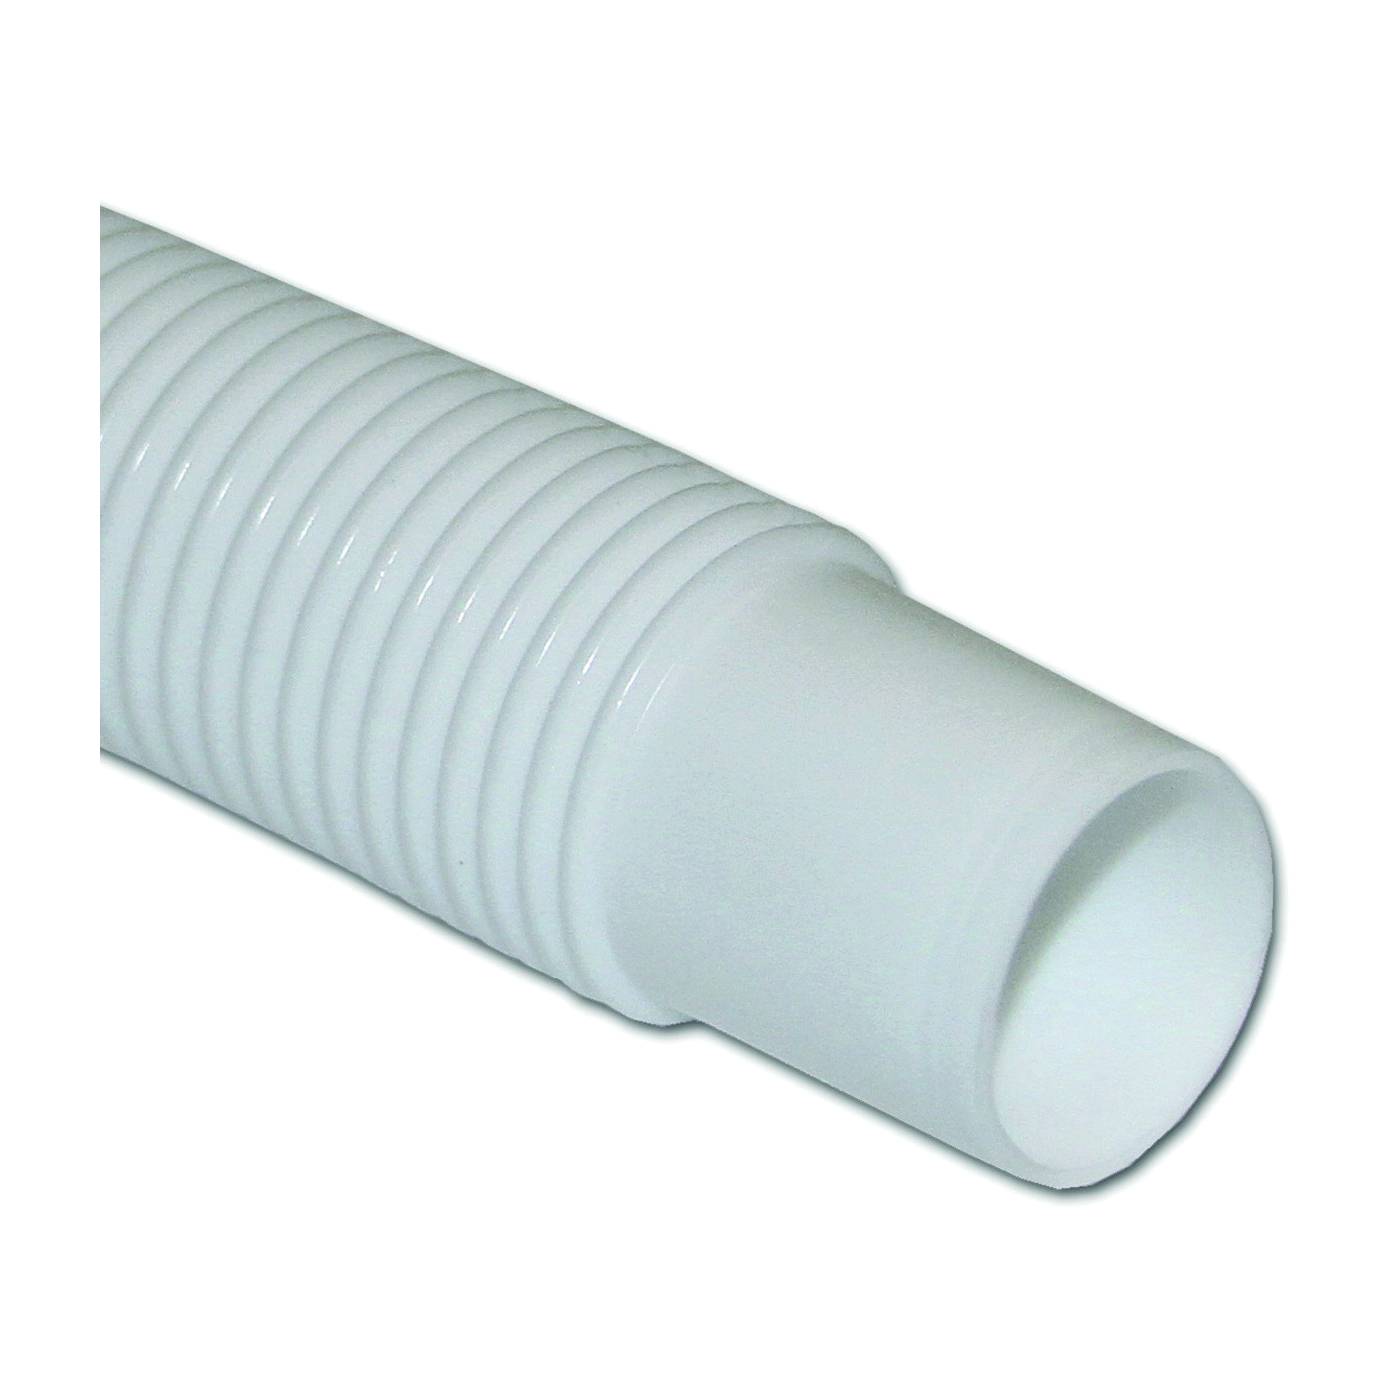 T34 Series T34005003/RBBP Discharge Hose, 1-1/4 in ID, 50 ft L, Polyethylene, Milky White